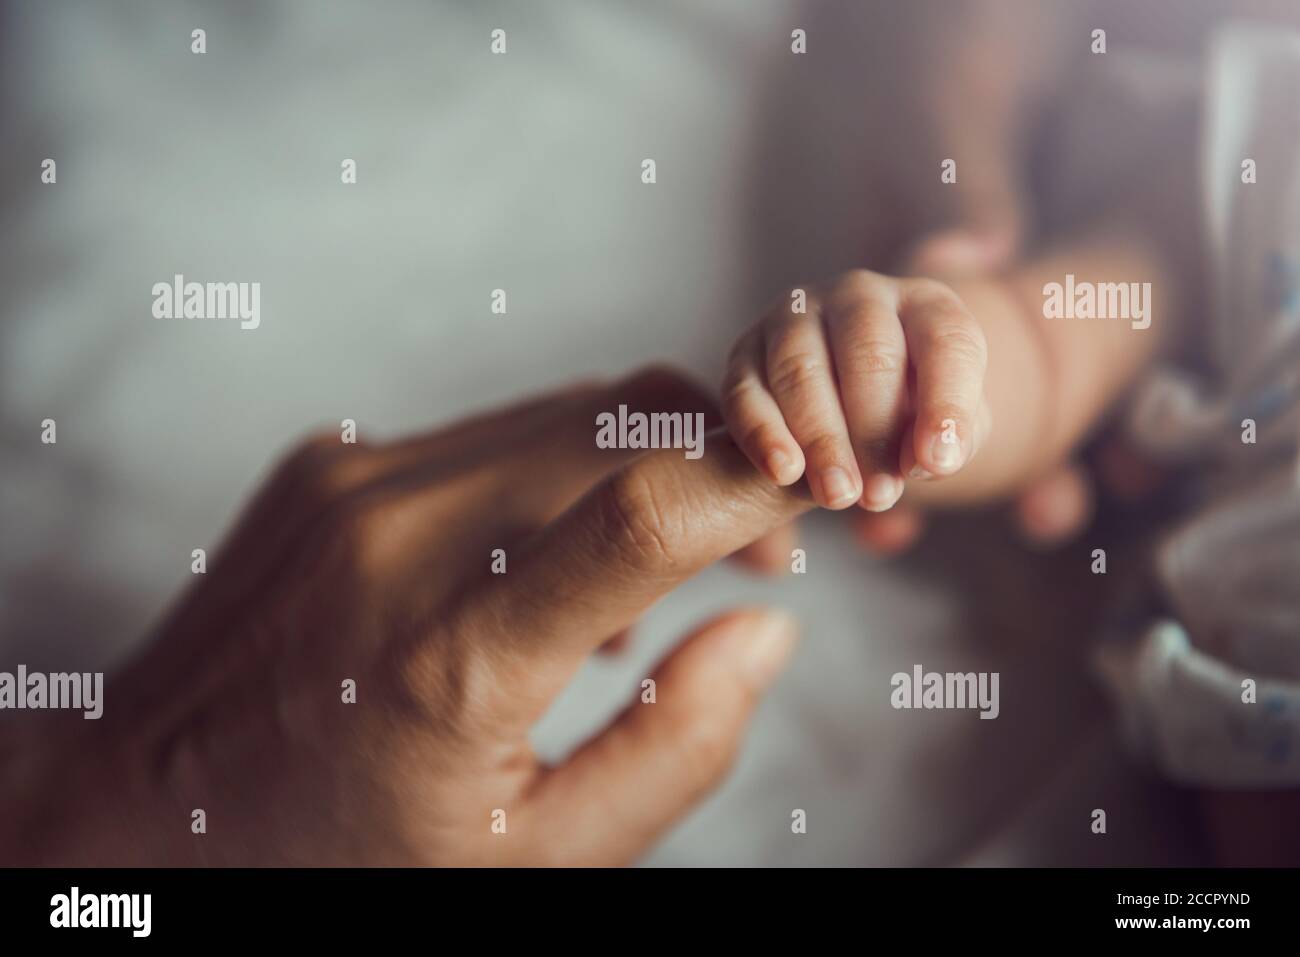 Newborn baby holding mother's hand. Banque D'Images